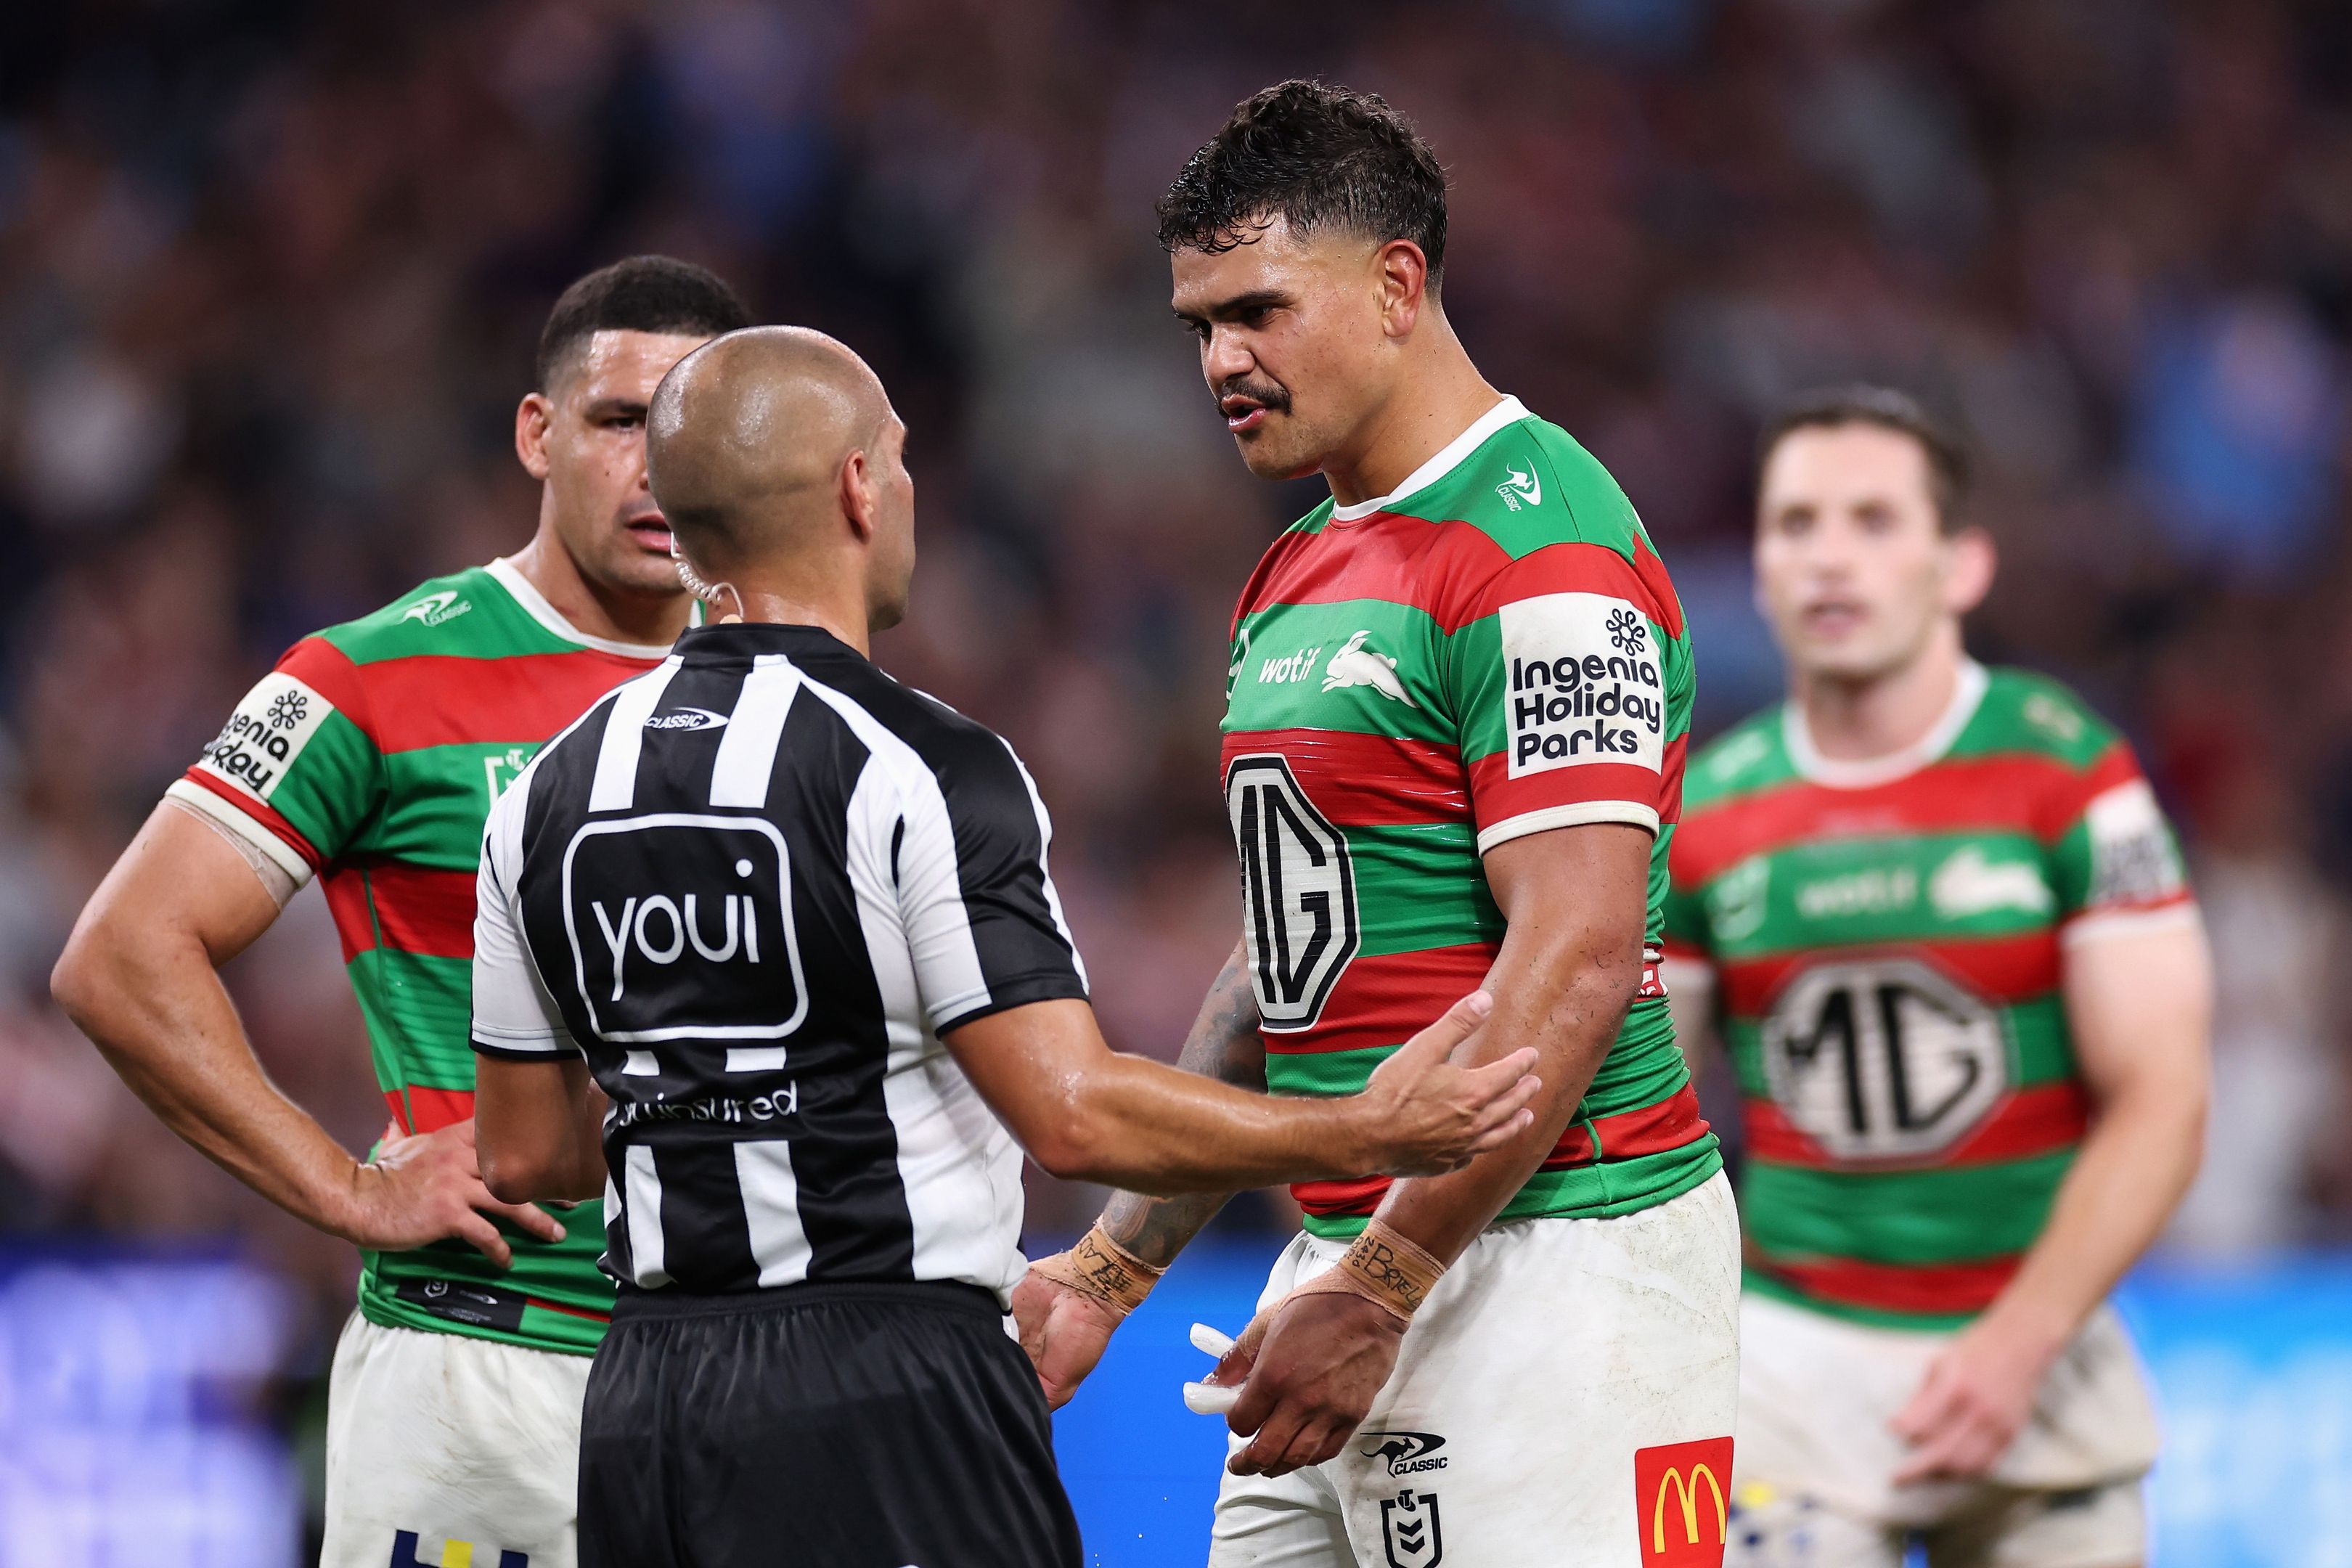 'He hates watching': Latrell Mitchell fears allayed amid untimely Rabbitohs suspension